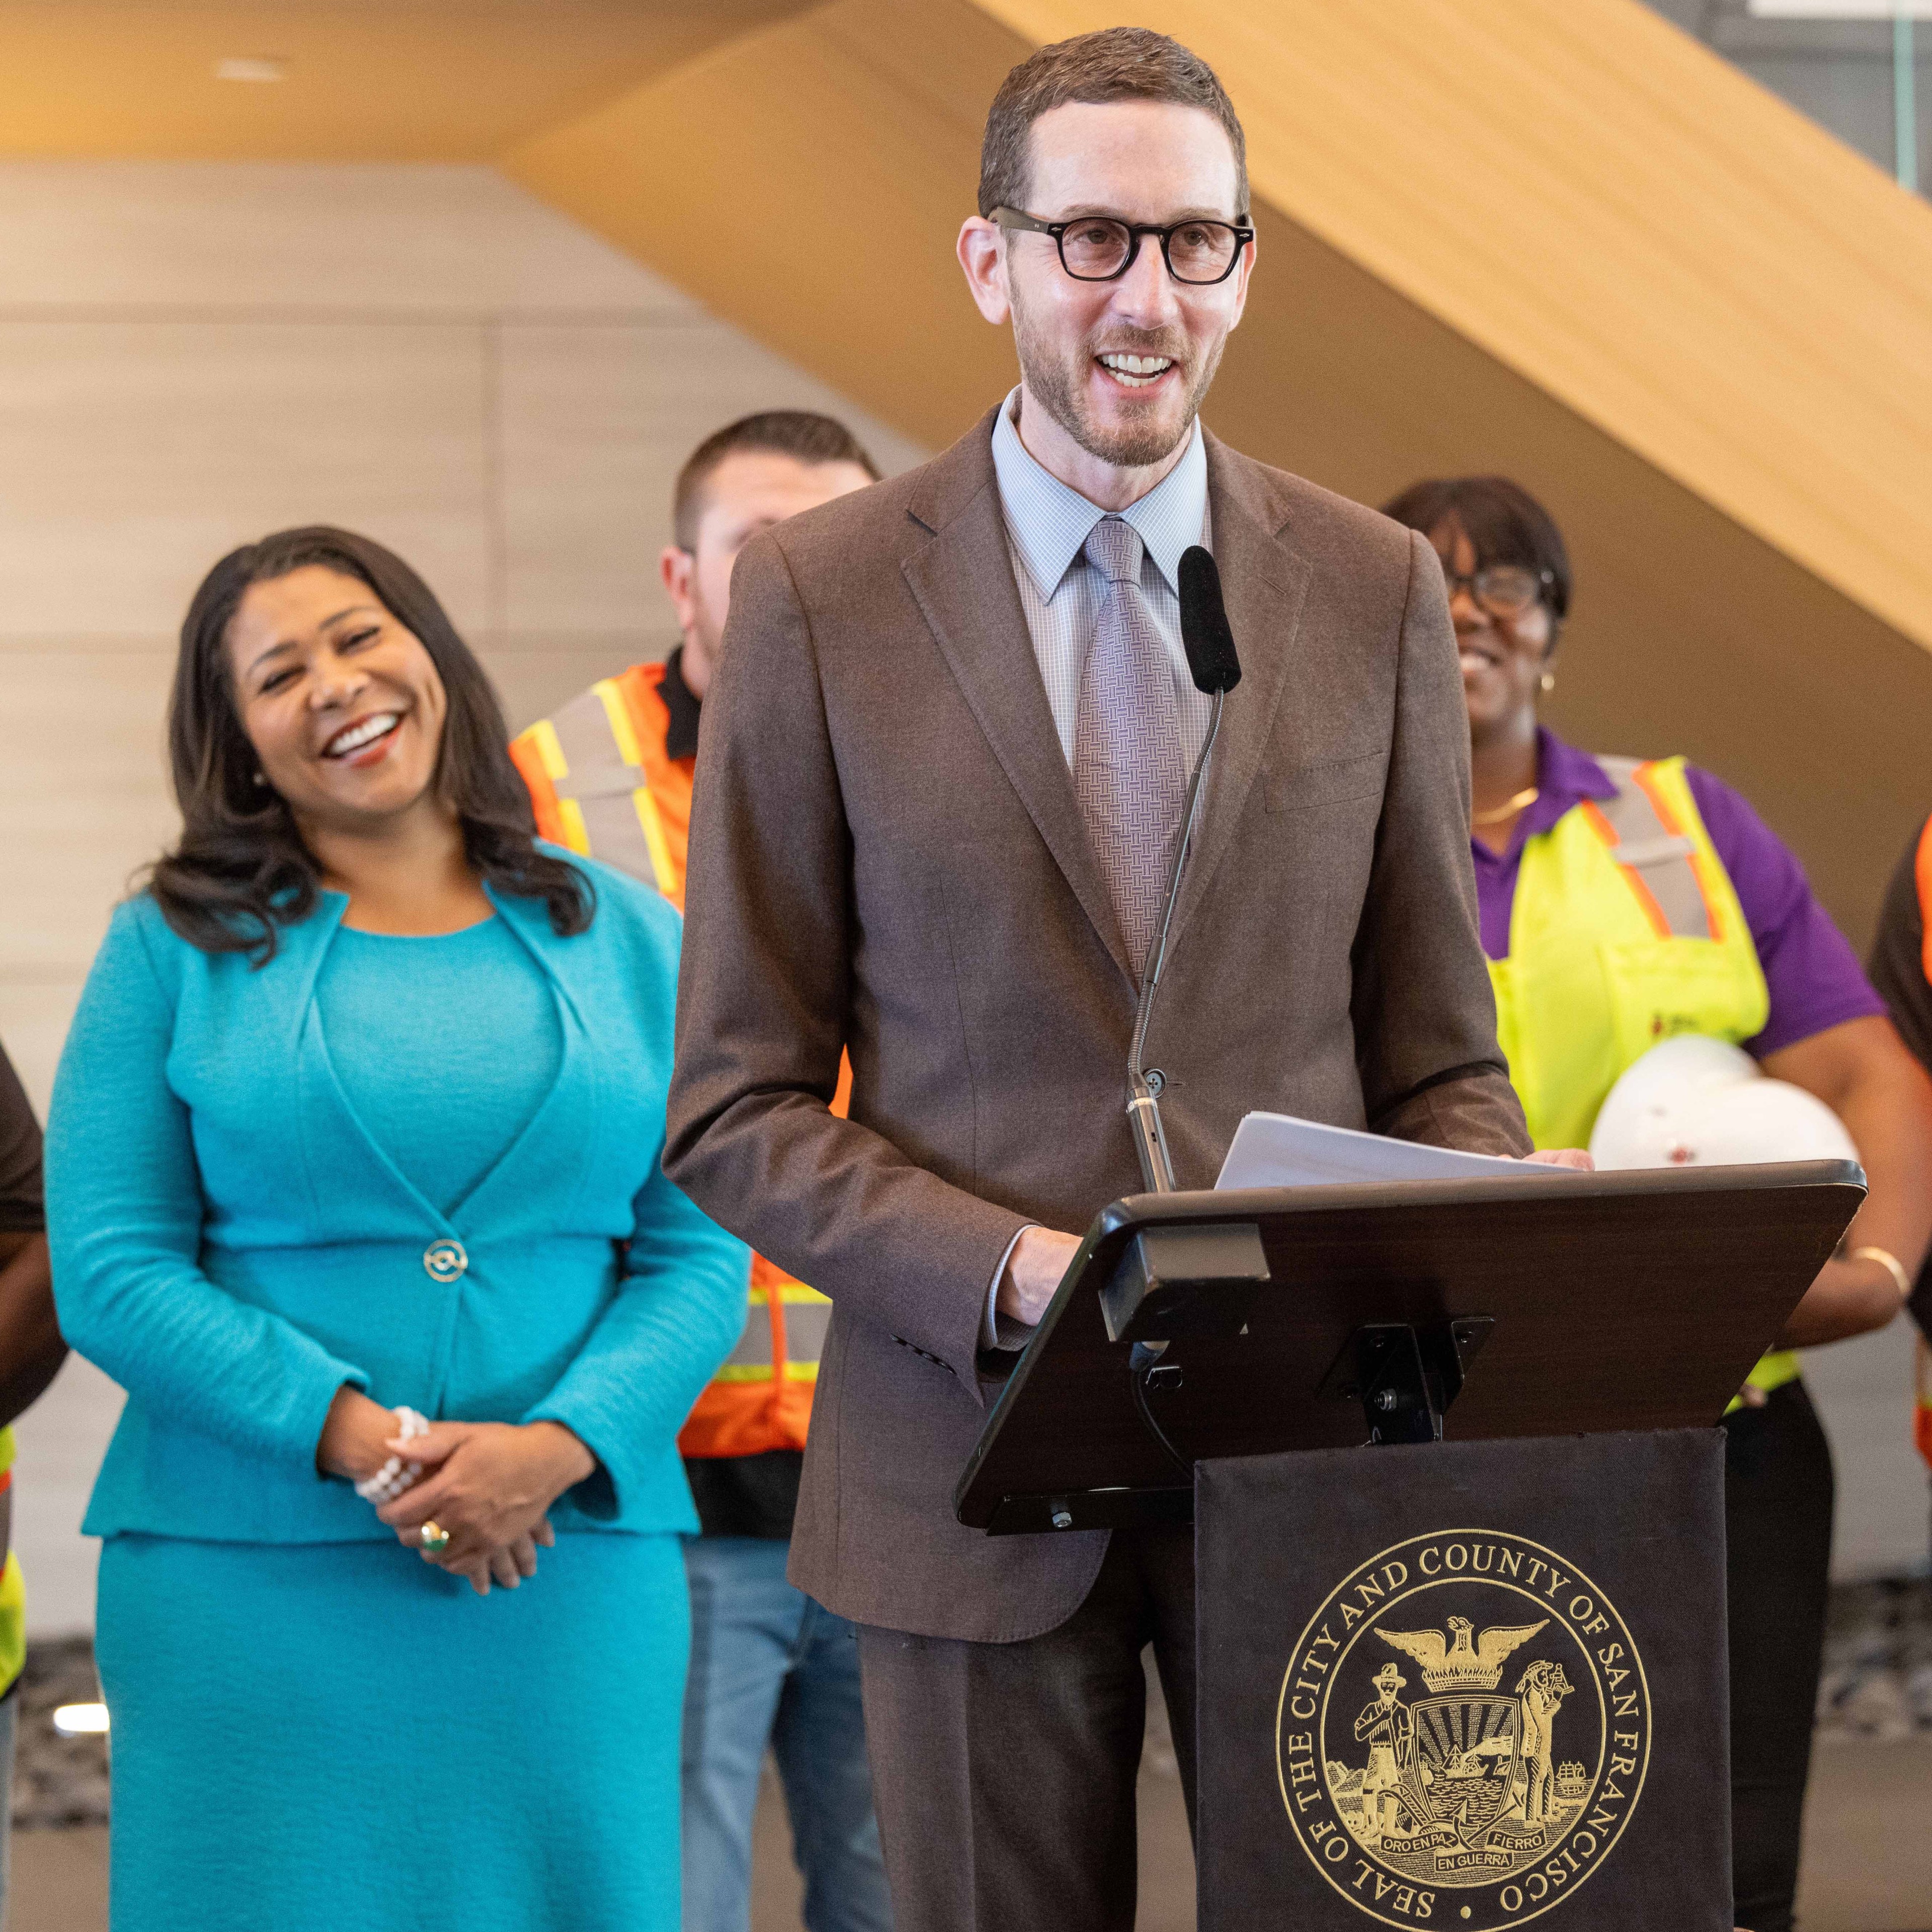 A man in a brown suit speaks at a podium with a microphone, while a woman in a blue outfit smiles behind him. Several people in construction attire stand in the background.